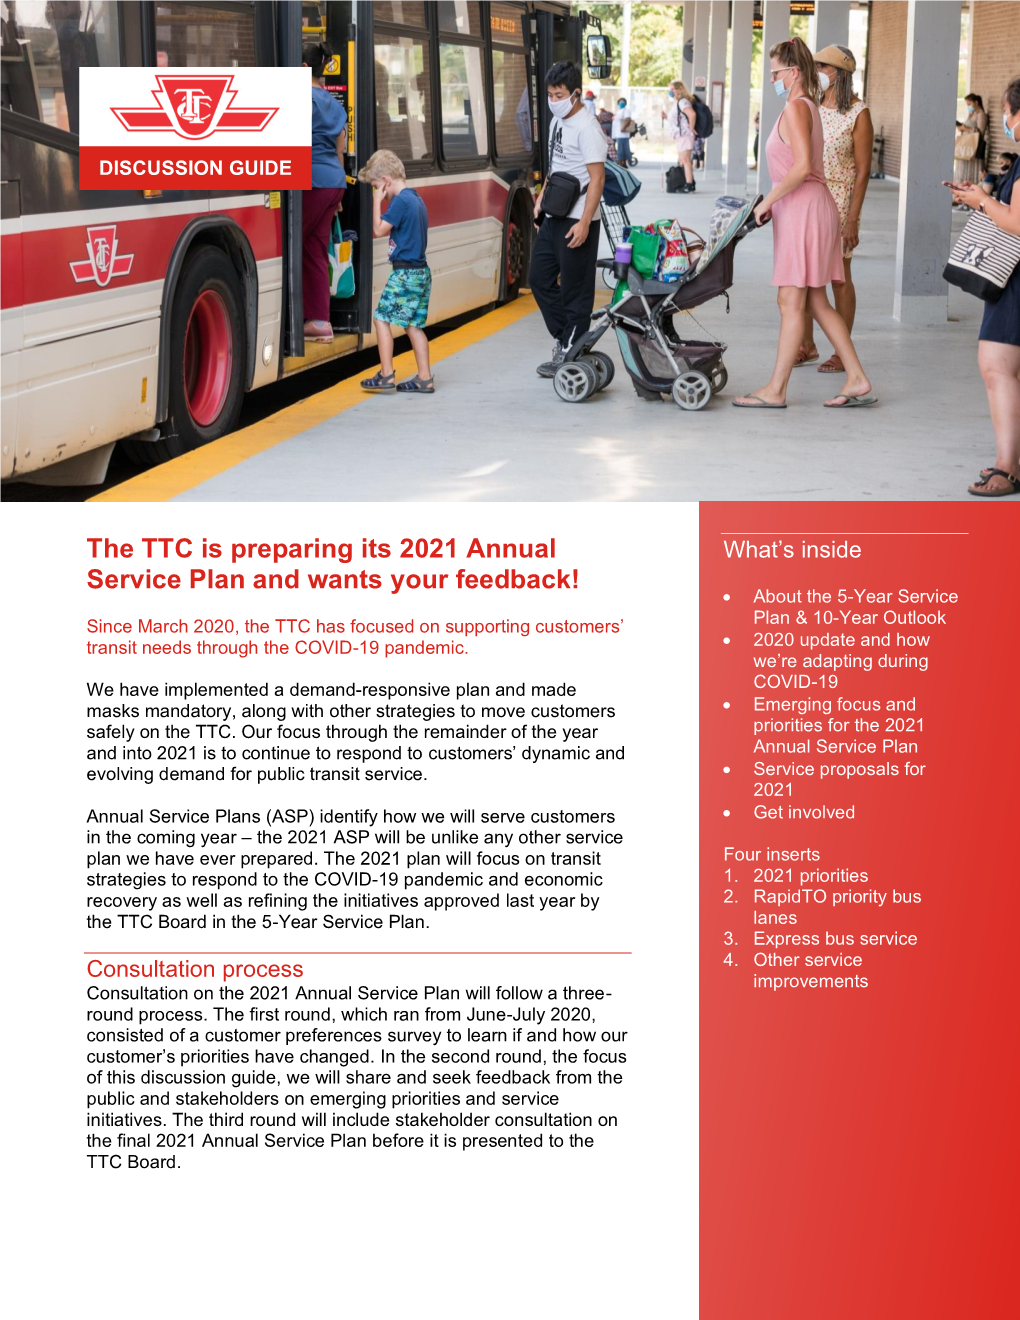 TTC 2021 Annual Service Plan Discussion Guide, Sept 22, 2020